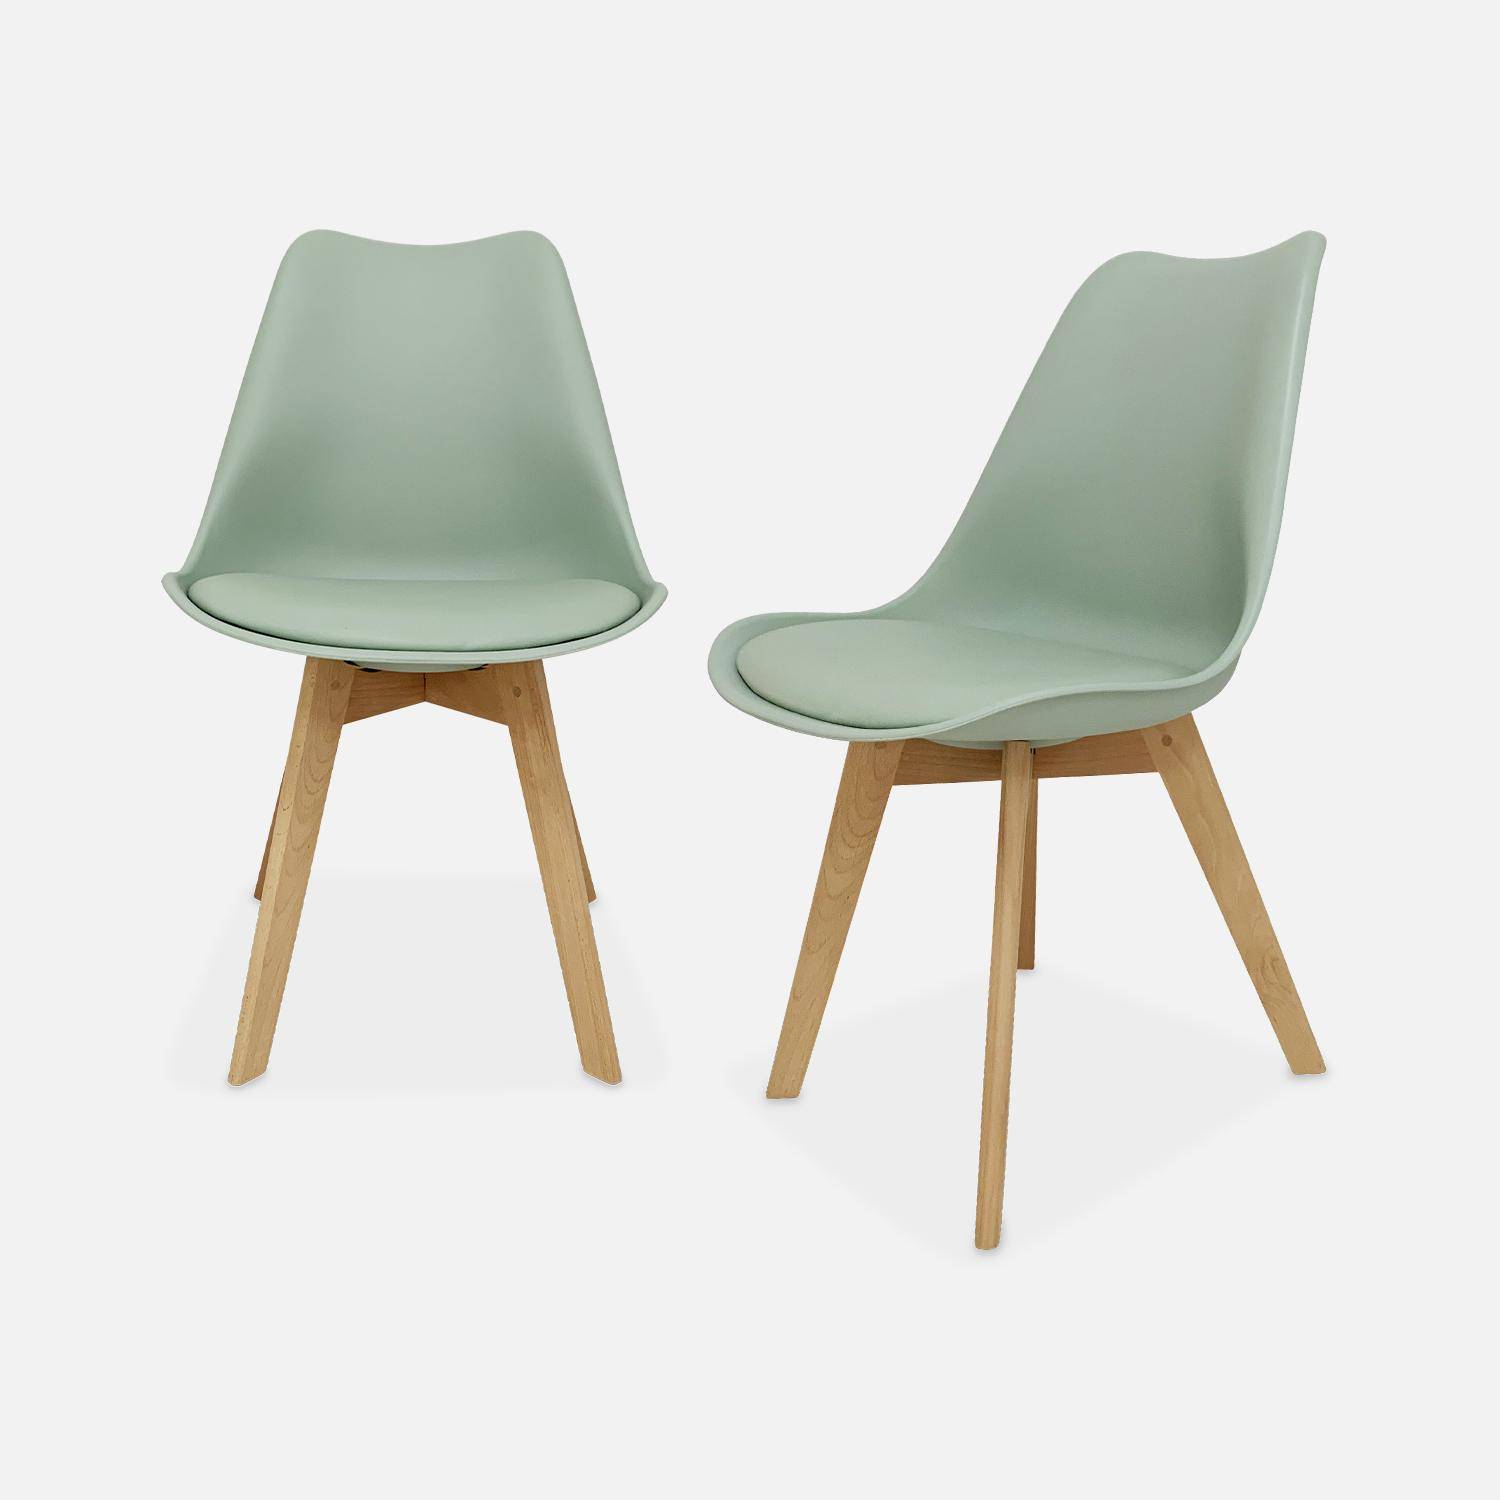 Pair of scandi-style dining chairs, green, L49xD55xH81cm, NILS Photo1